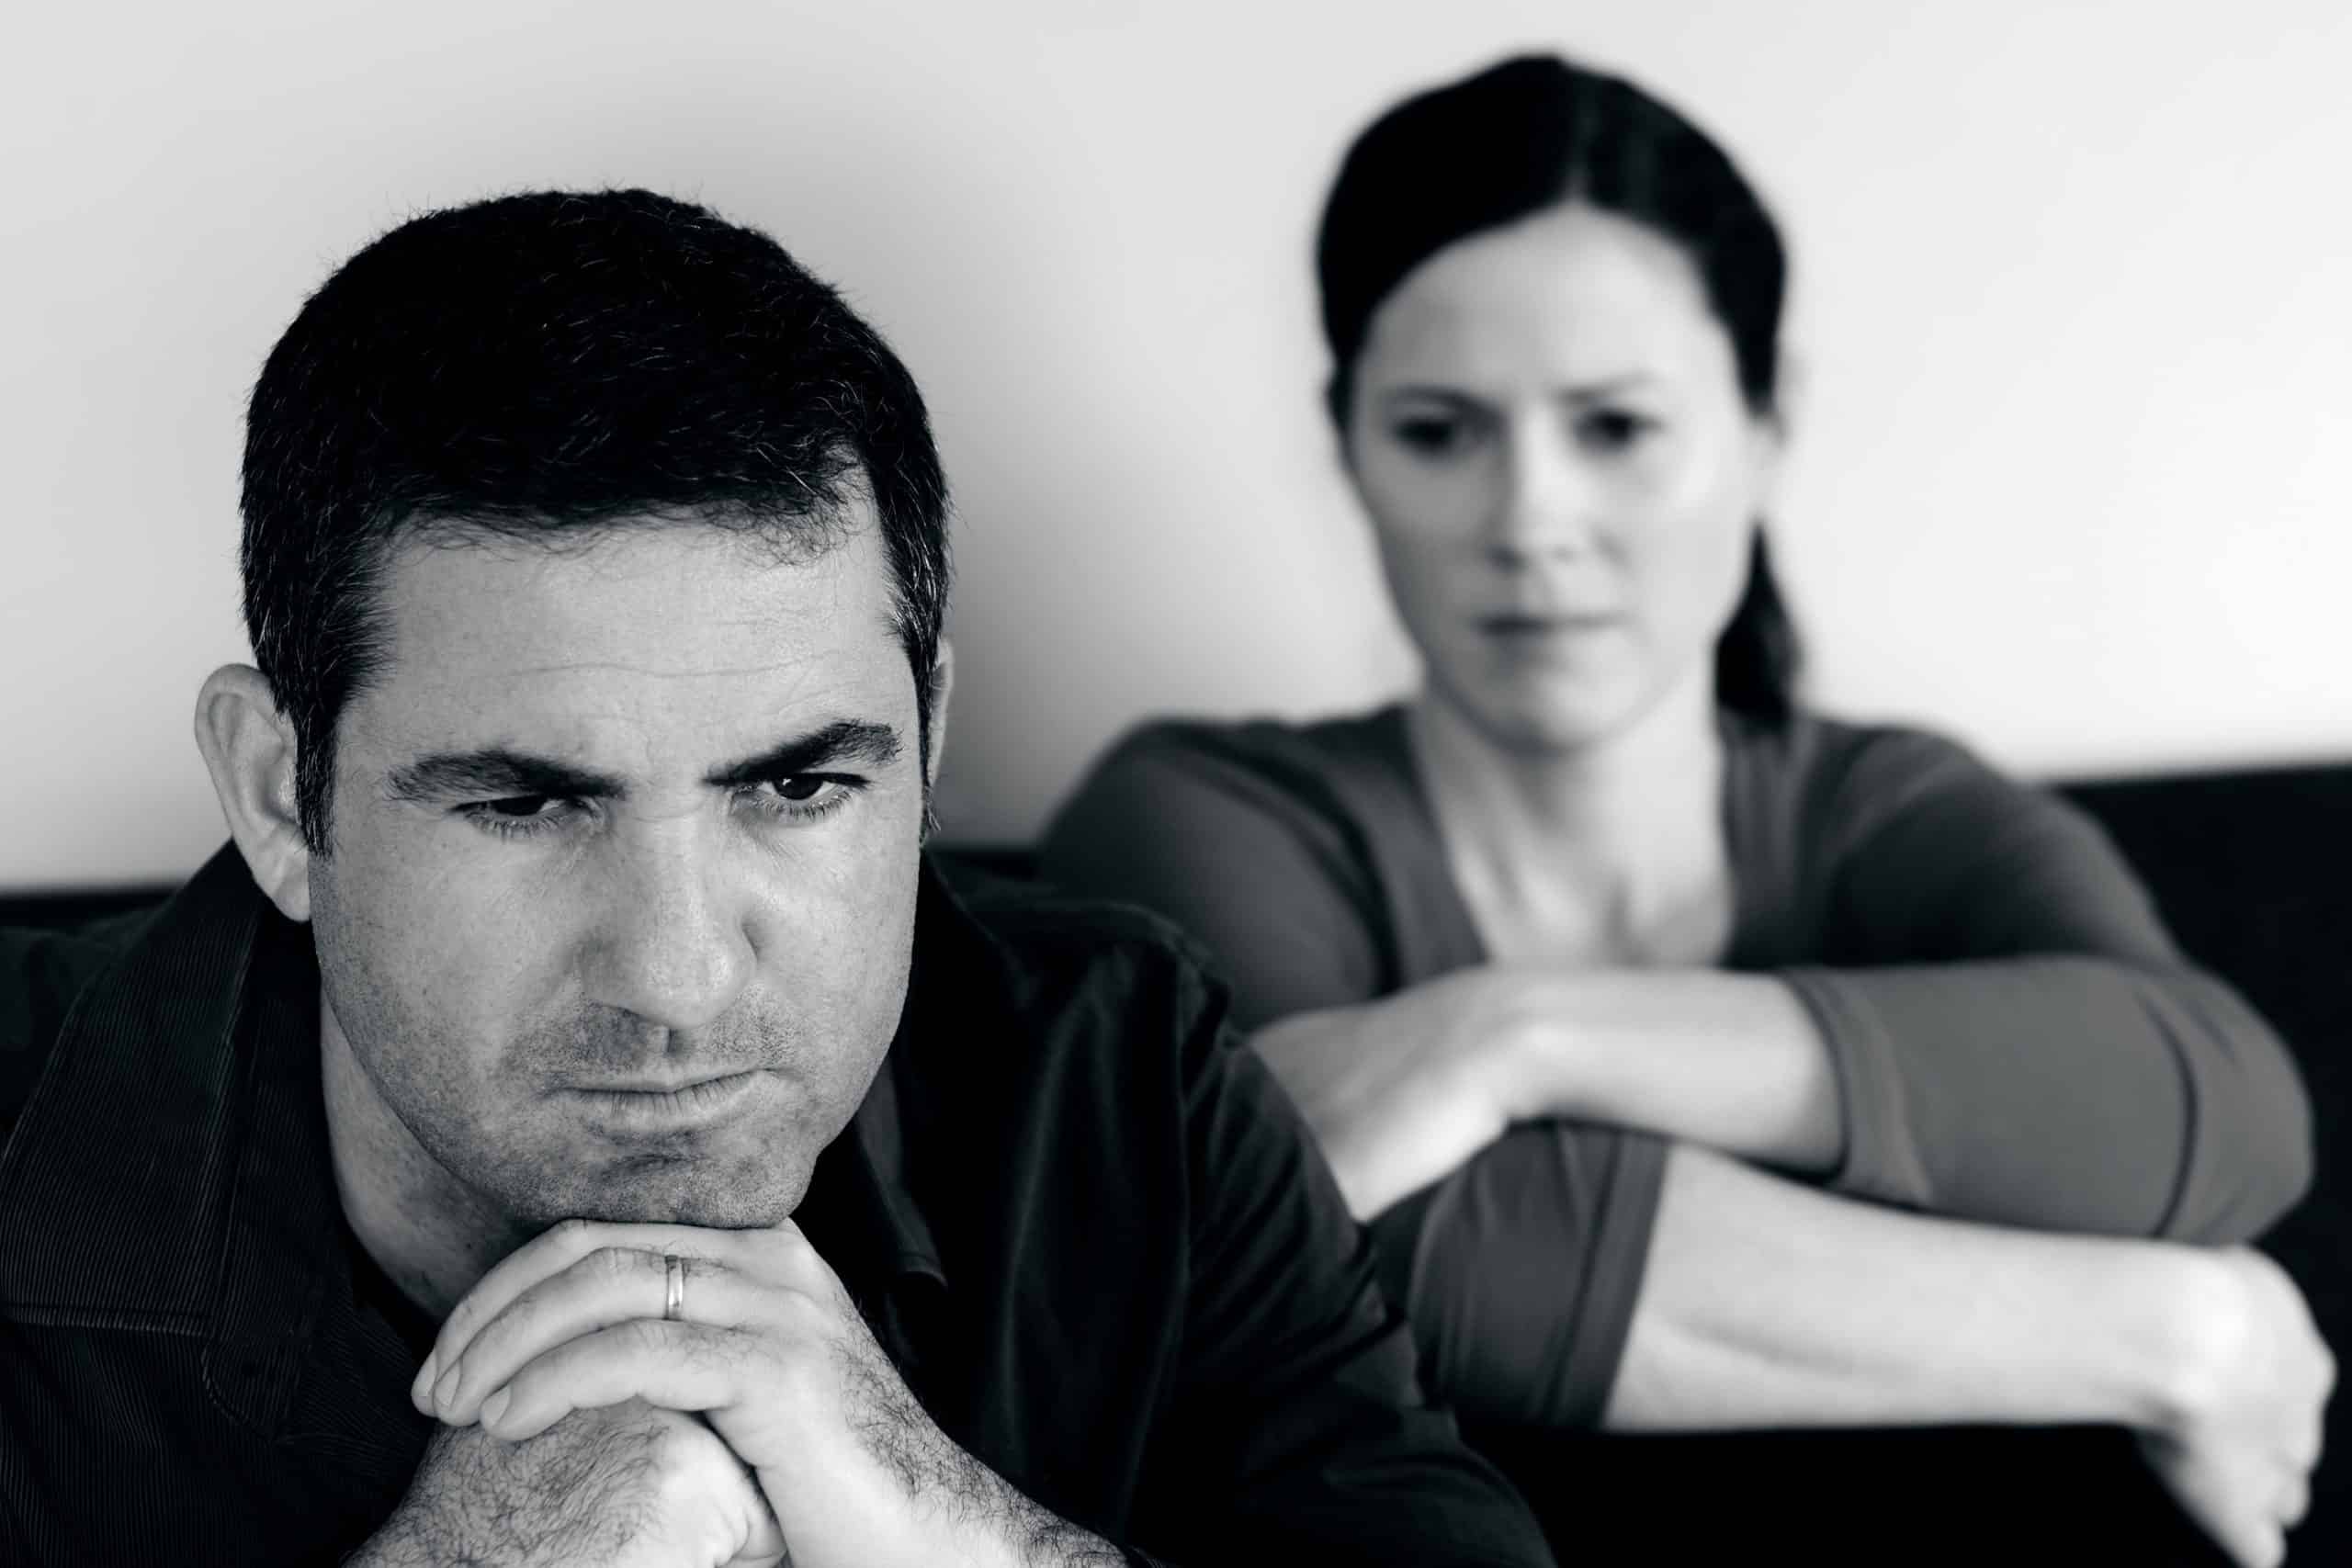 unhappy in your marriage?